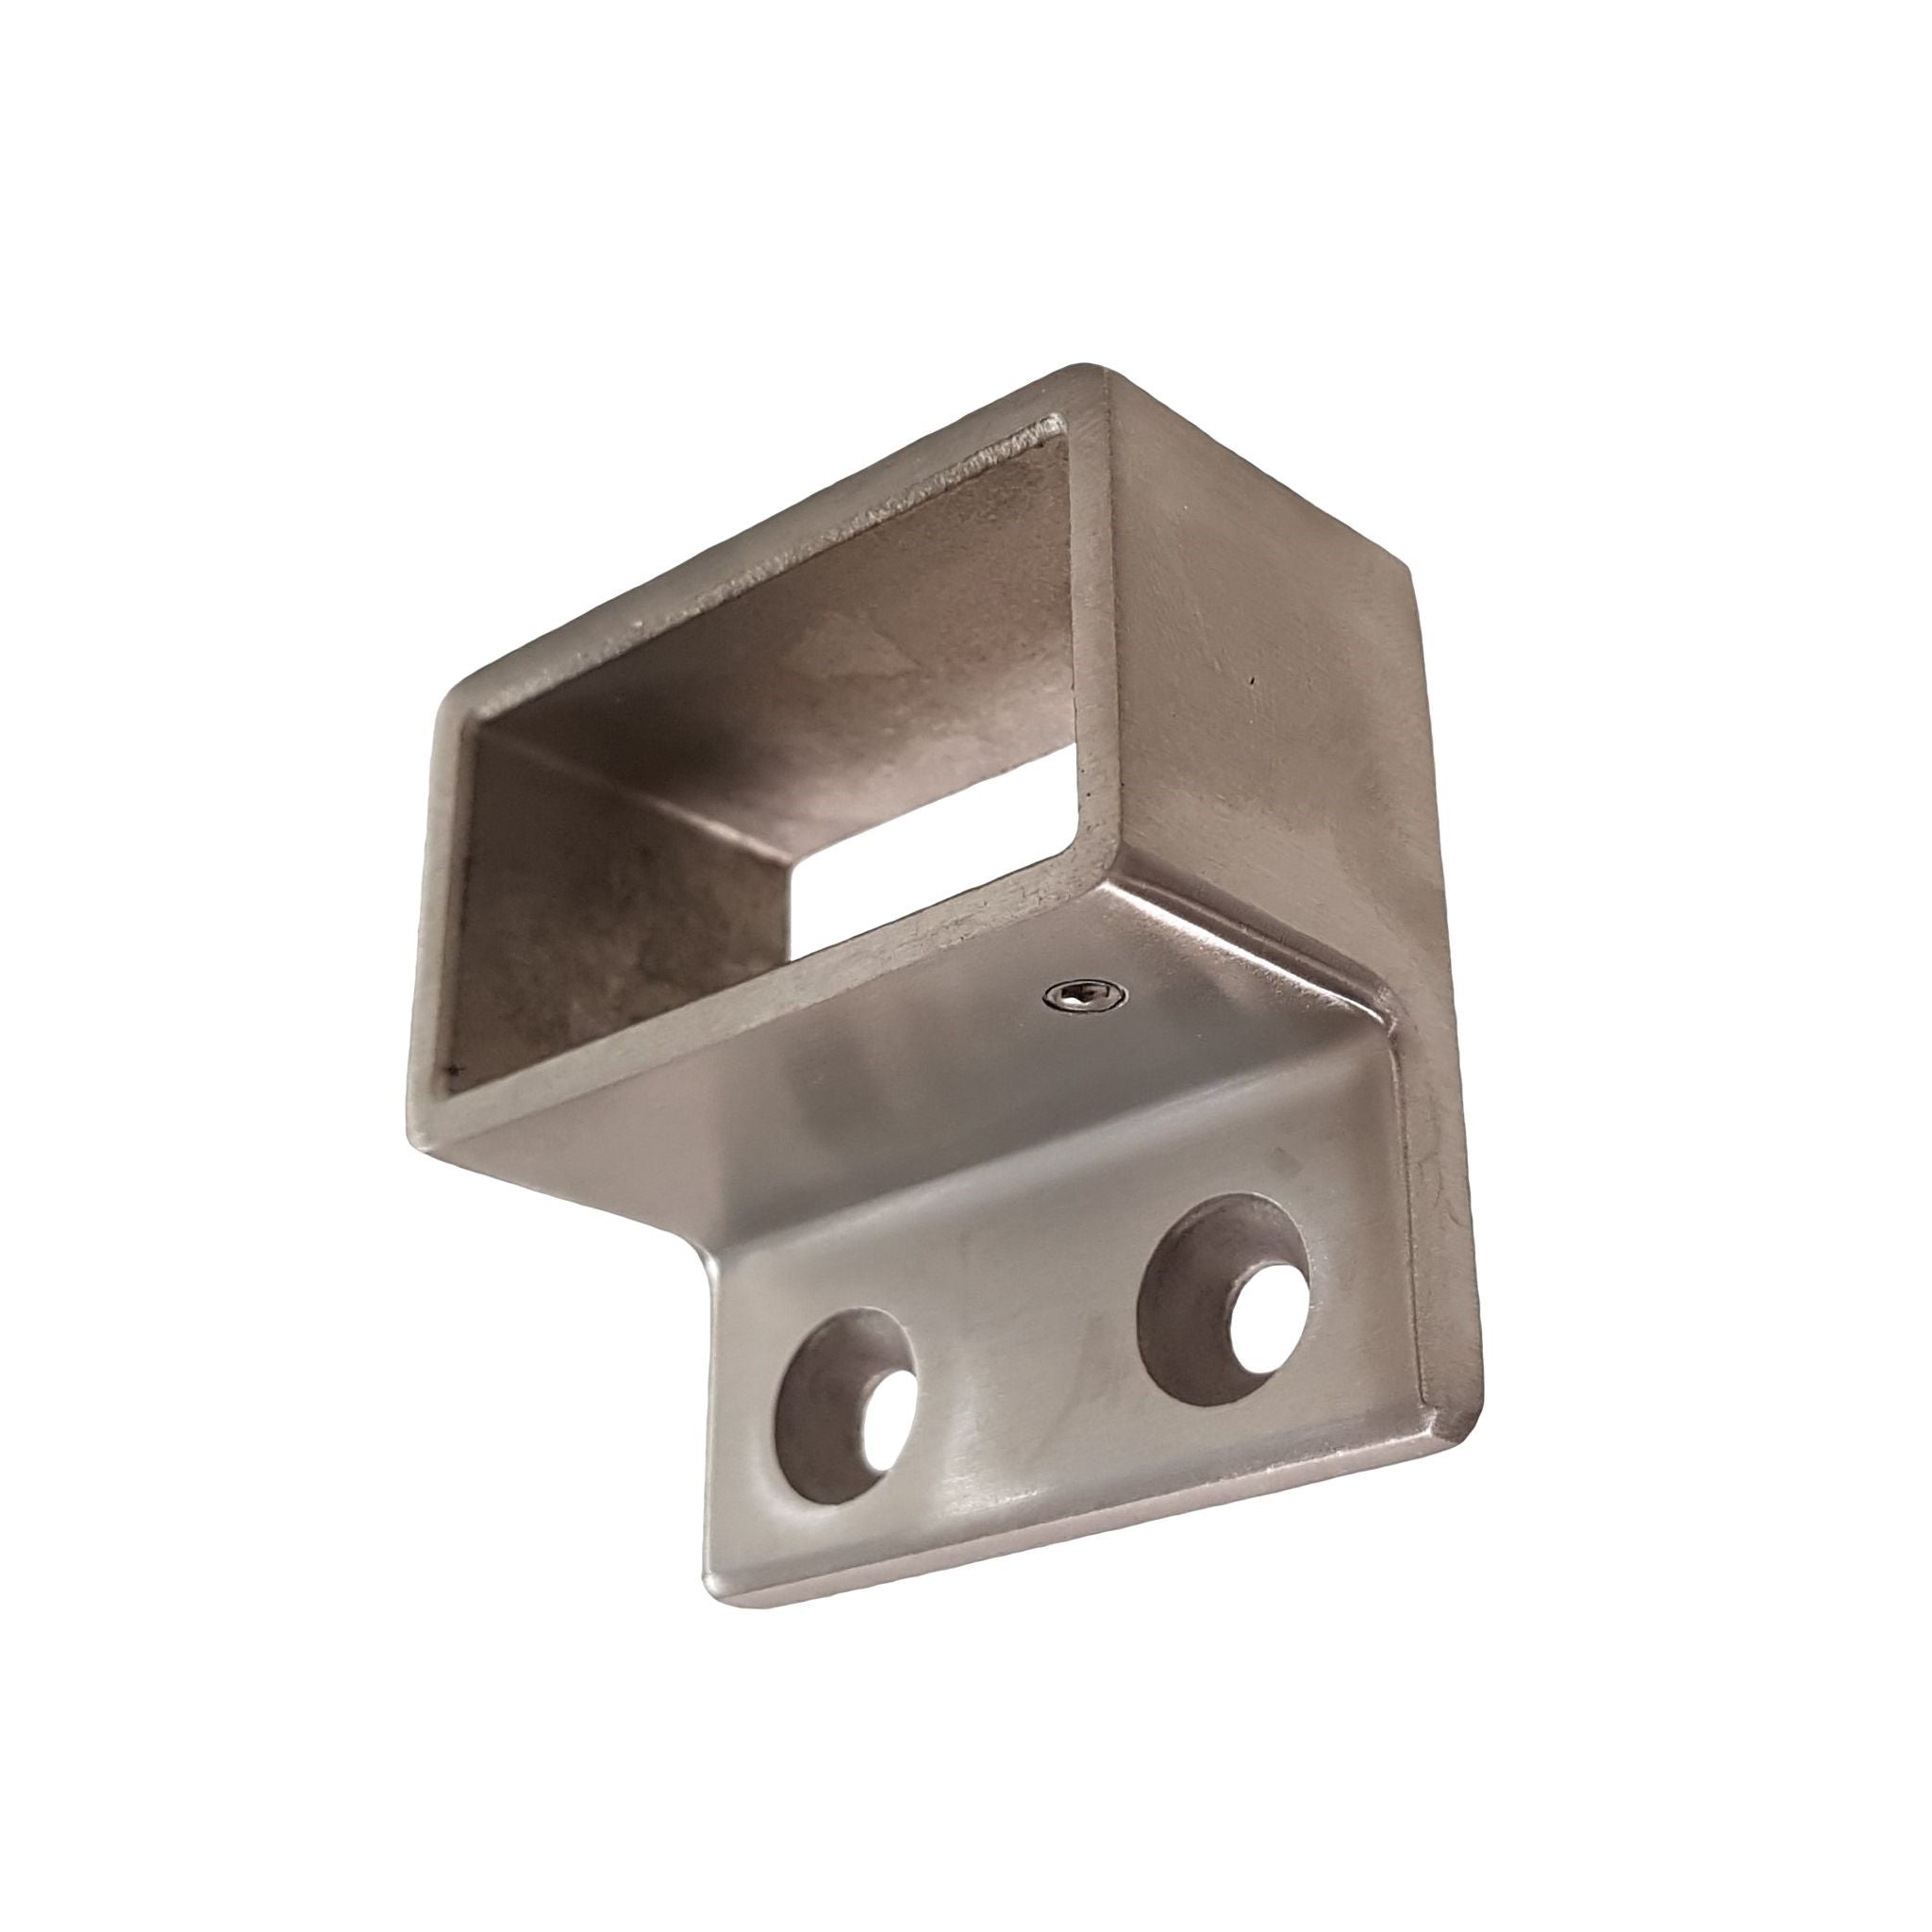 50x25mm - Wall Flange - Stainless Steel Products